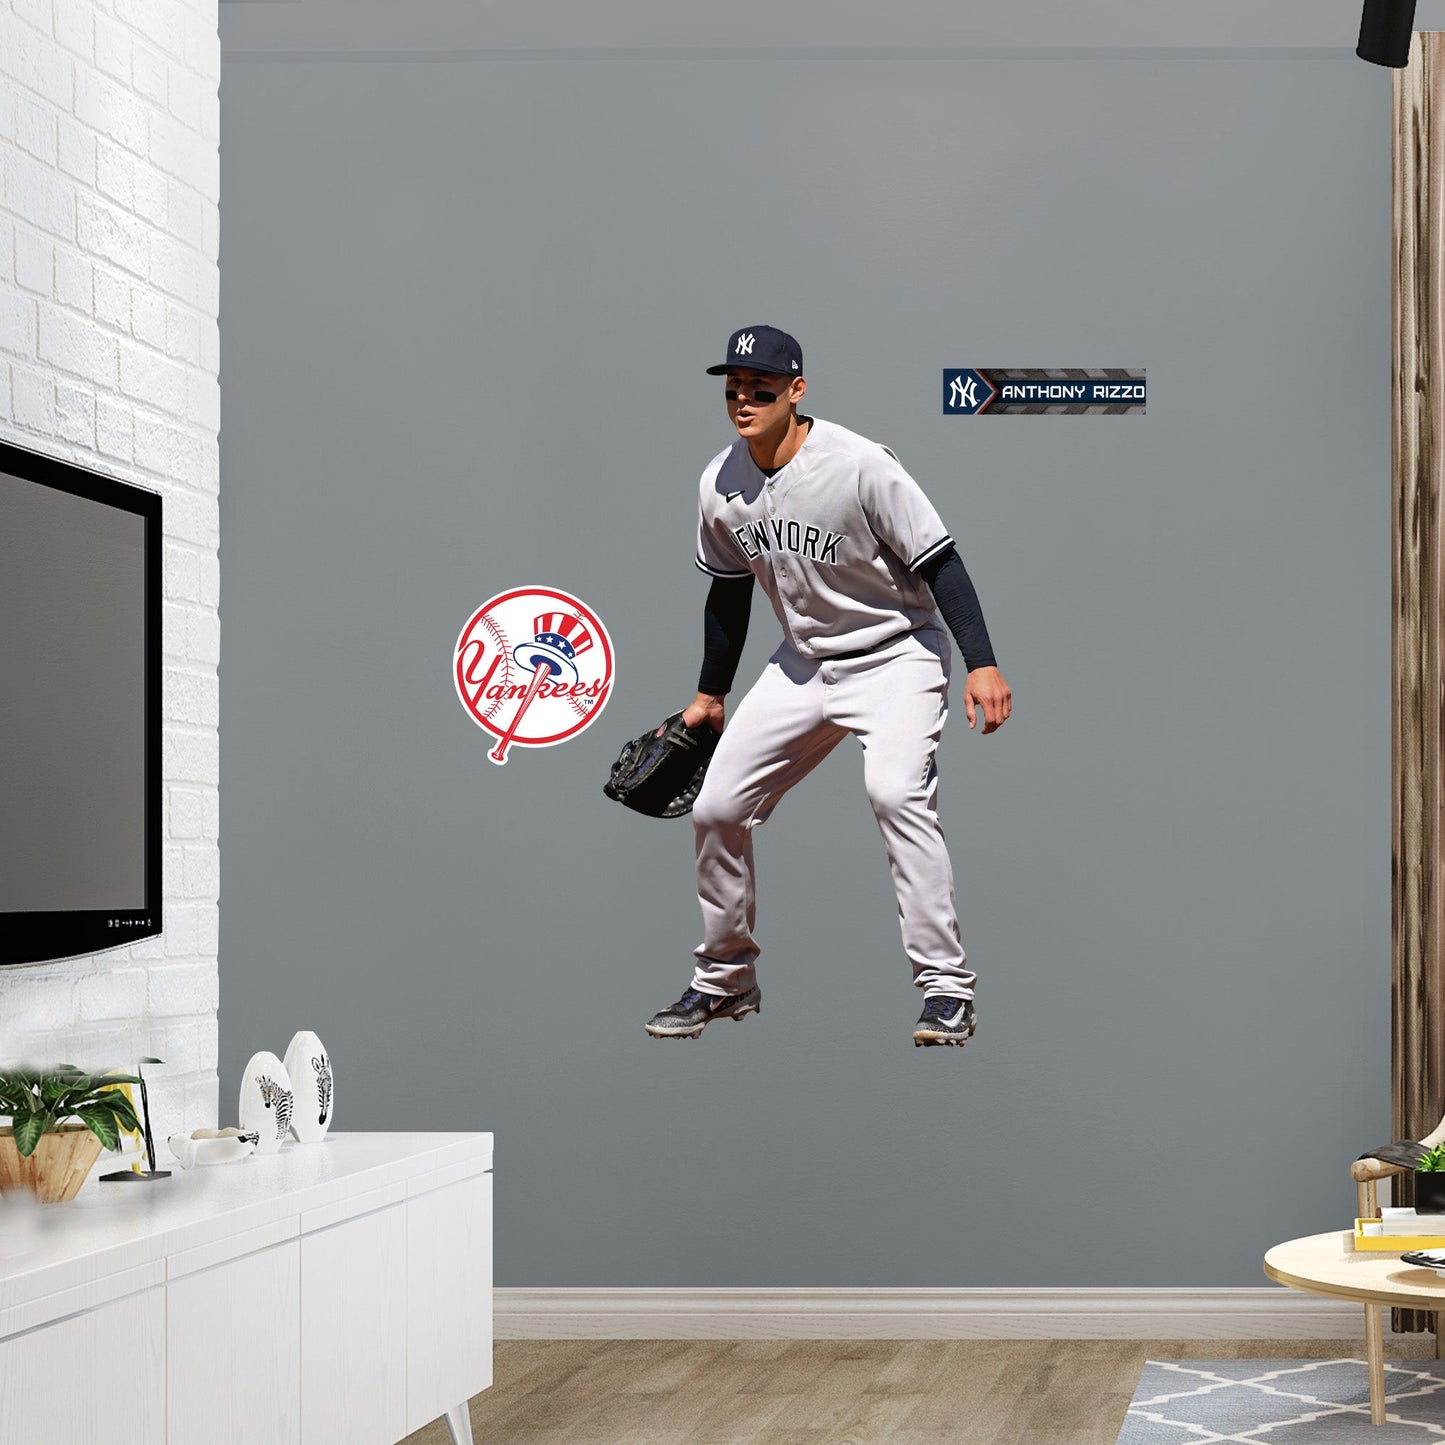 New York Yankees: Anthony Rizzo  Fielding        - Officially Licensed MLB Removable     Adhesive Decal